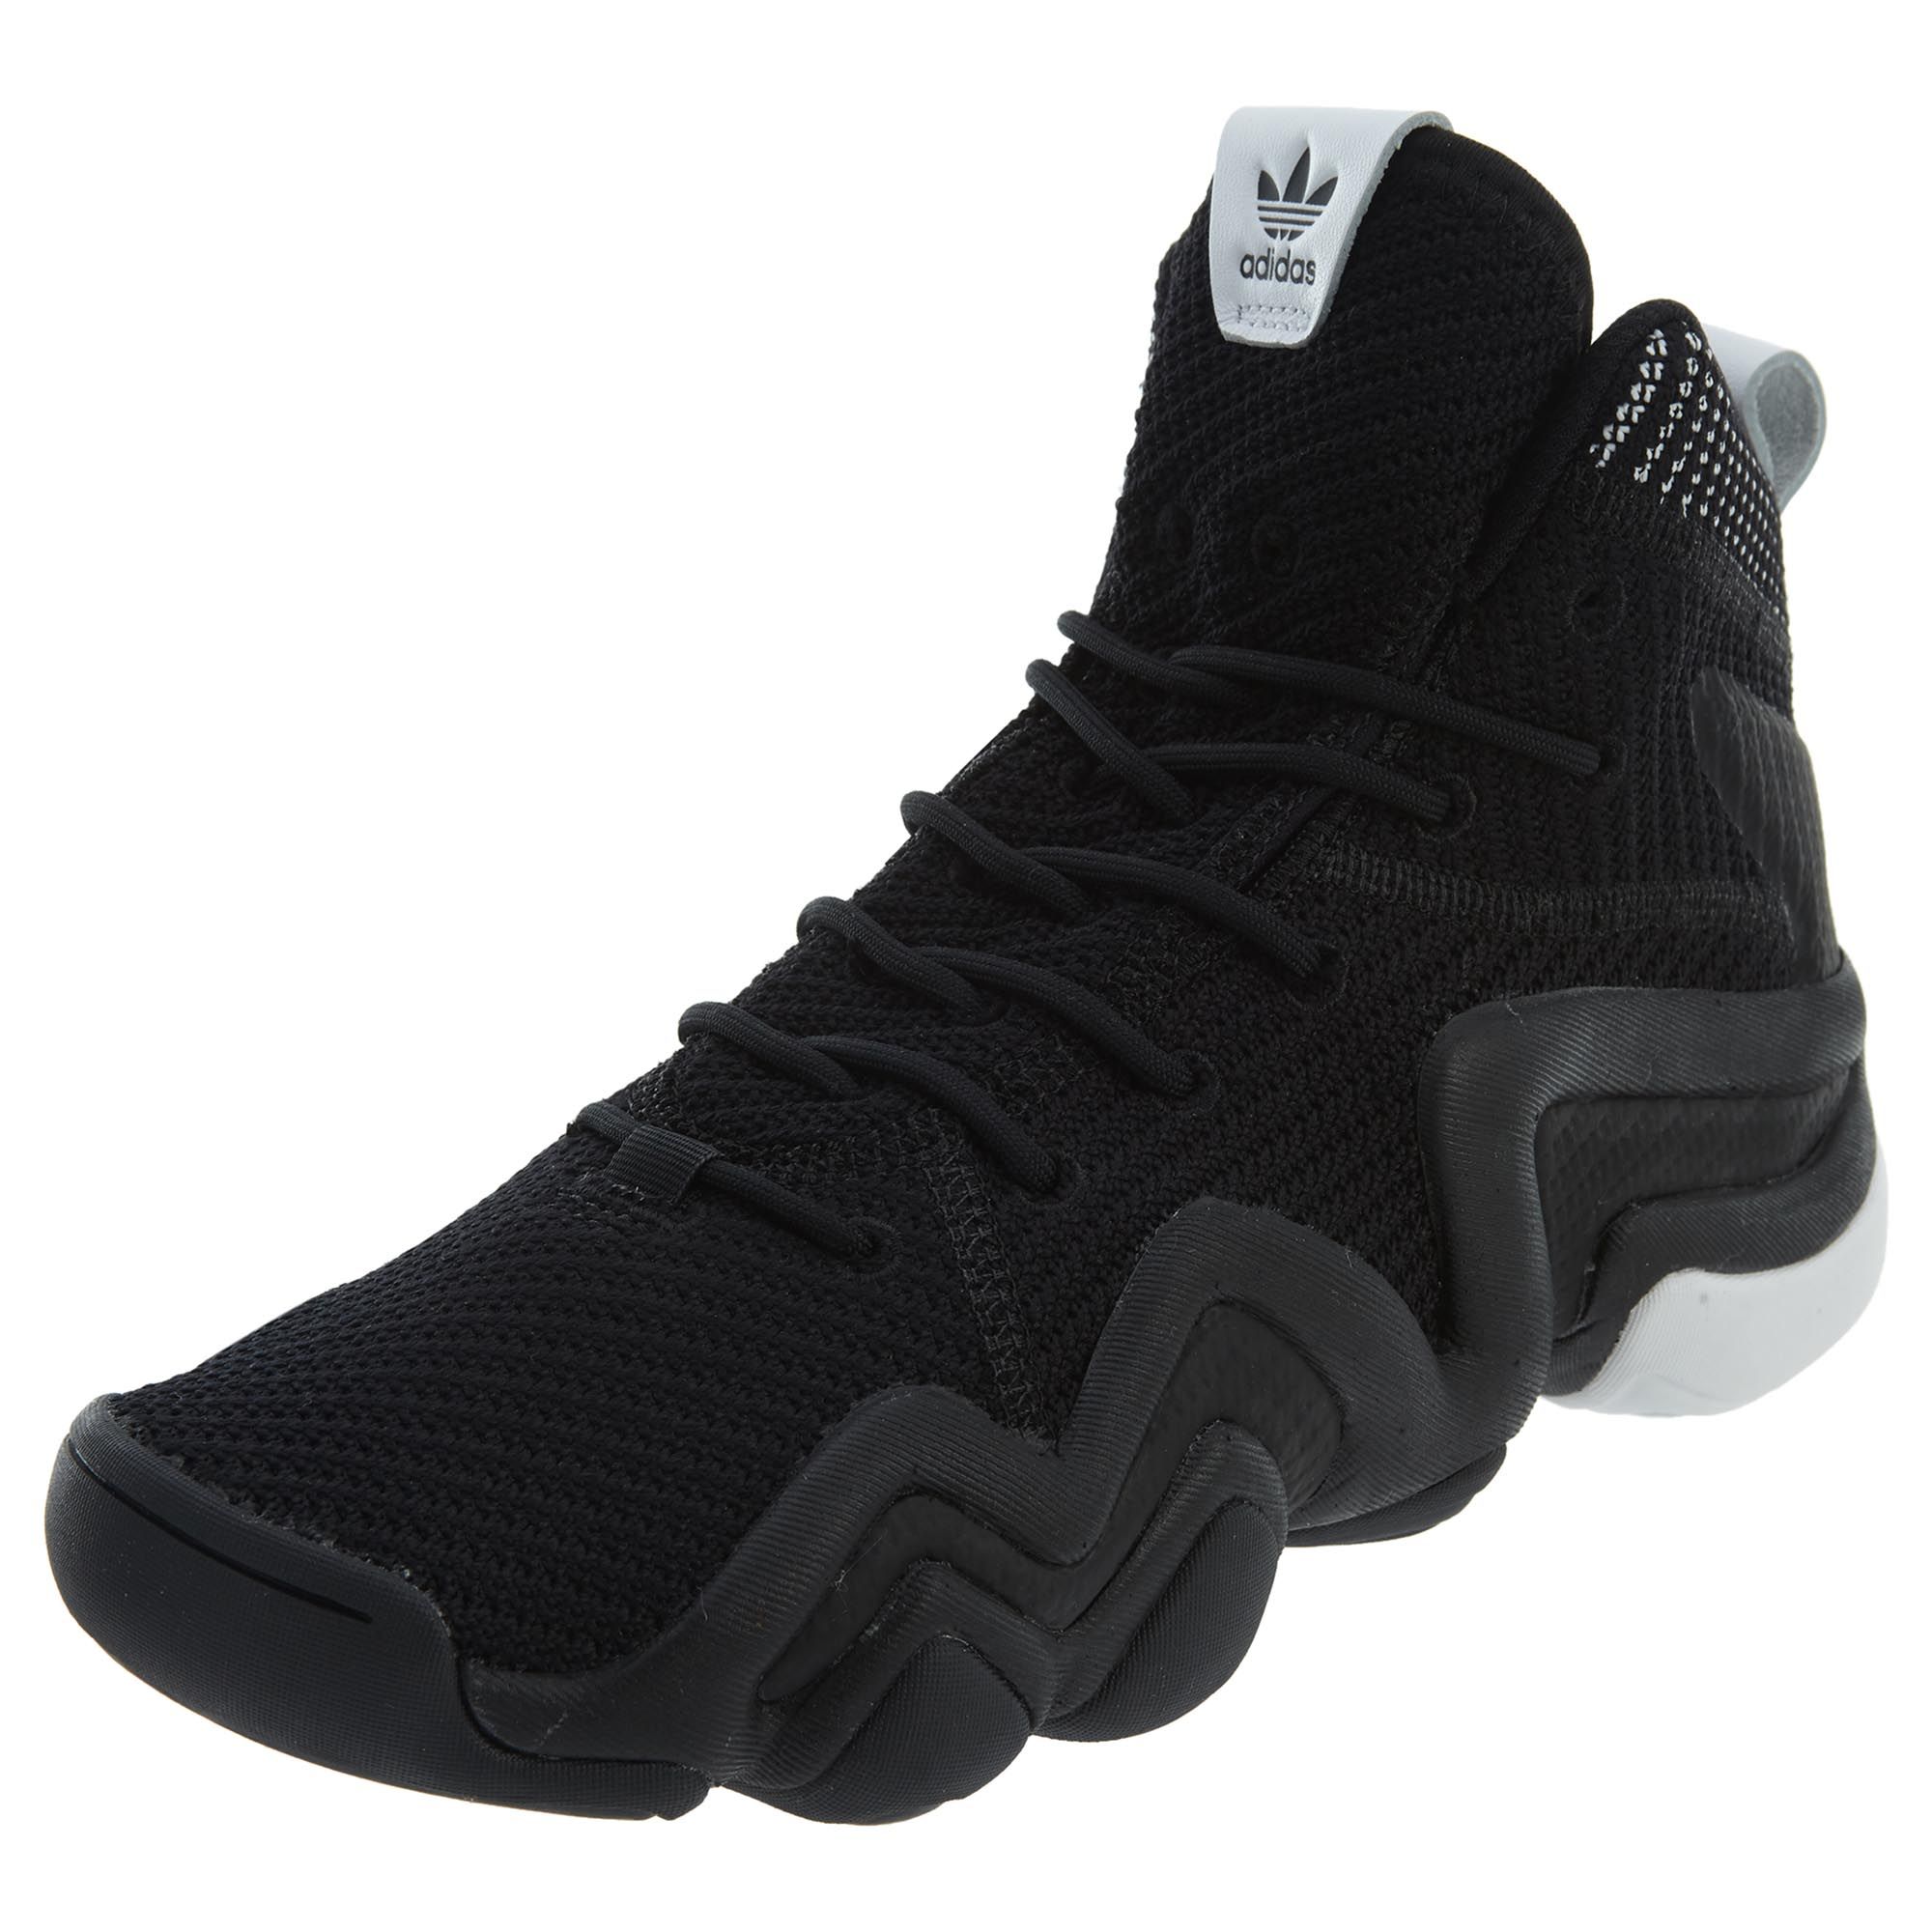 Adidas Crazy 8 Adv Pk Mens Style : By3602-Blk/Blk/Wht